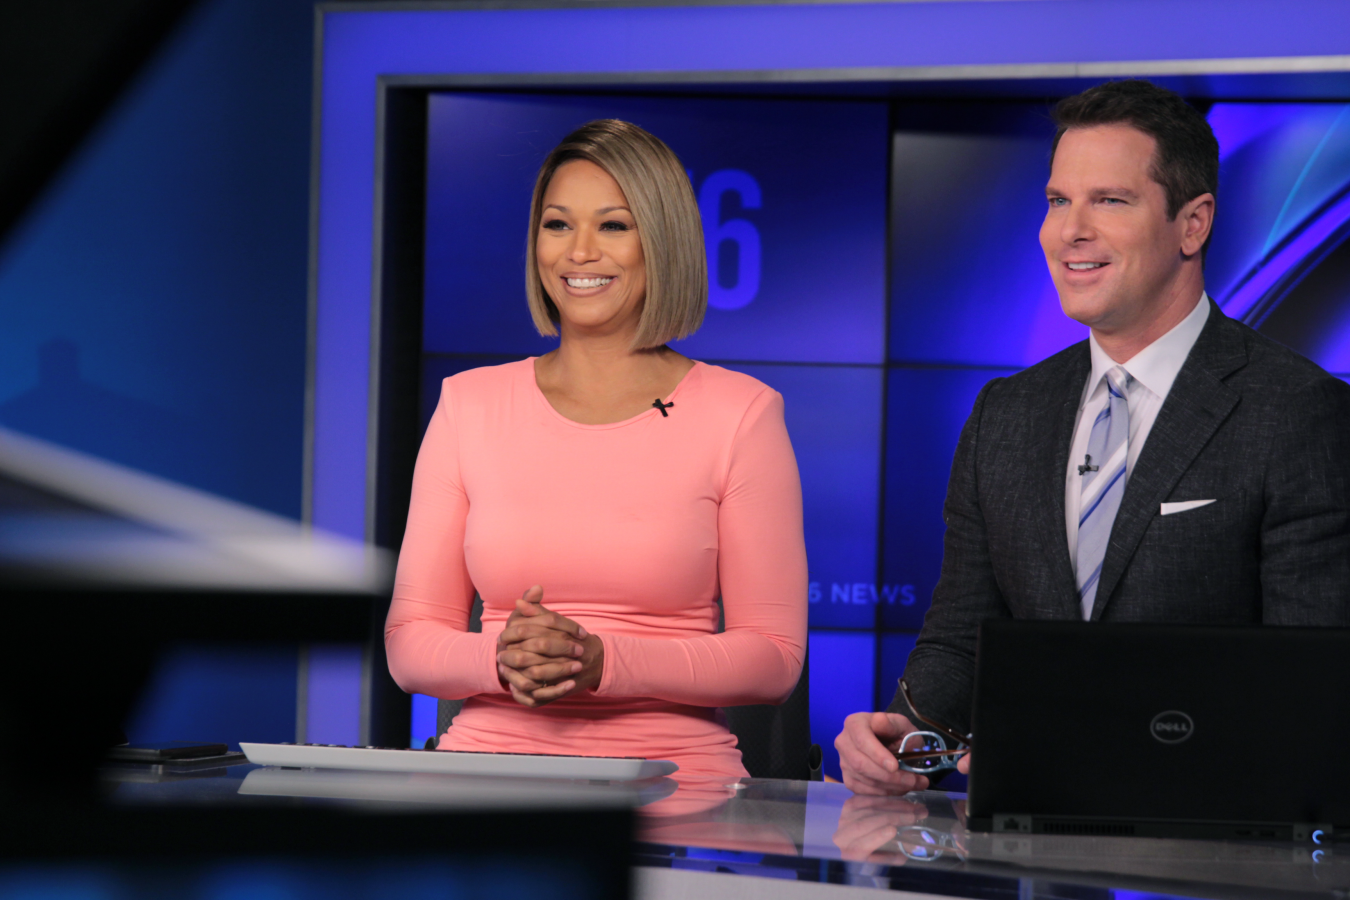 Atlanta news station CBS46 becomes fastest growing by embracing diversity.